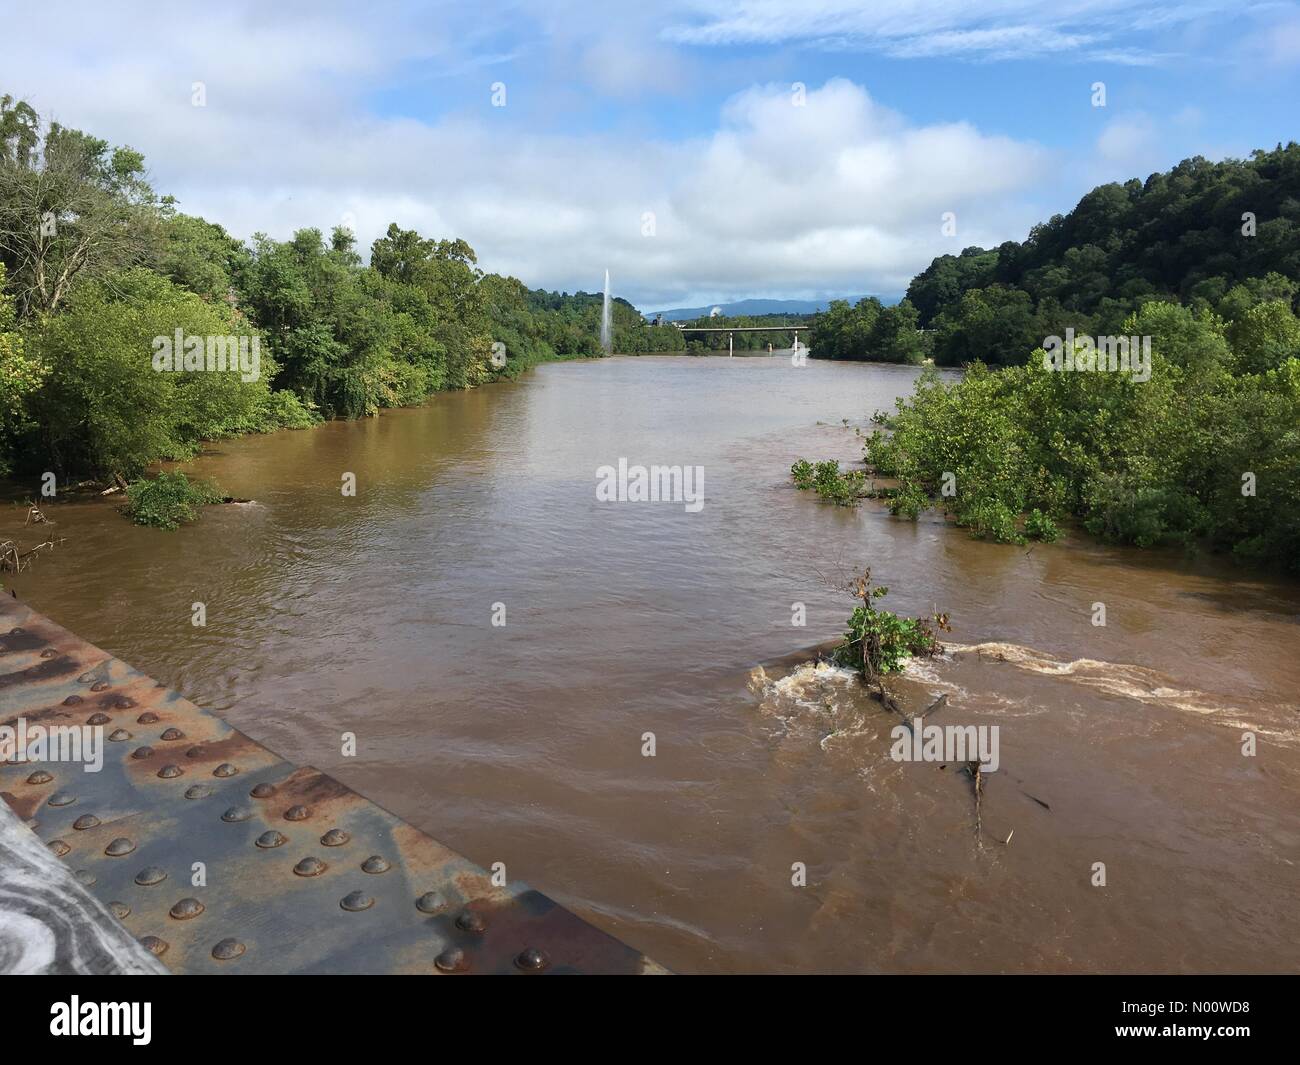 Madison Heights, Virginia, USA. 04th Aug, 2018. August 4, 2018. James River in Lynchburg Va. First day of sunshine after a week of heavy rains that led to the evacuation of 124 households. Credit: Emanuel Tanjala/StockimoNews/Alamy Live News Stock Photo